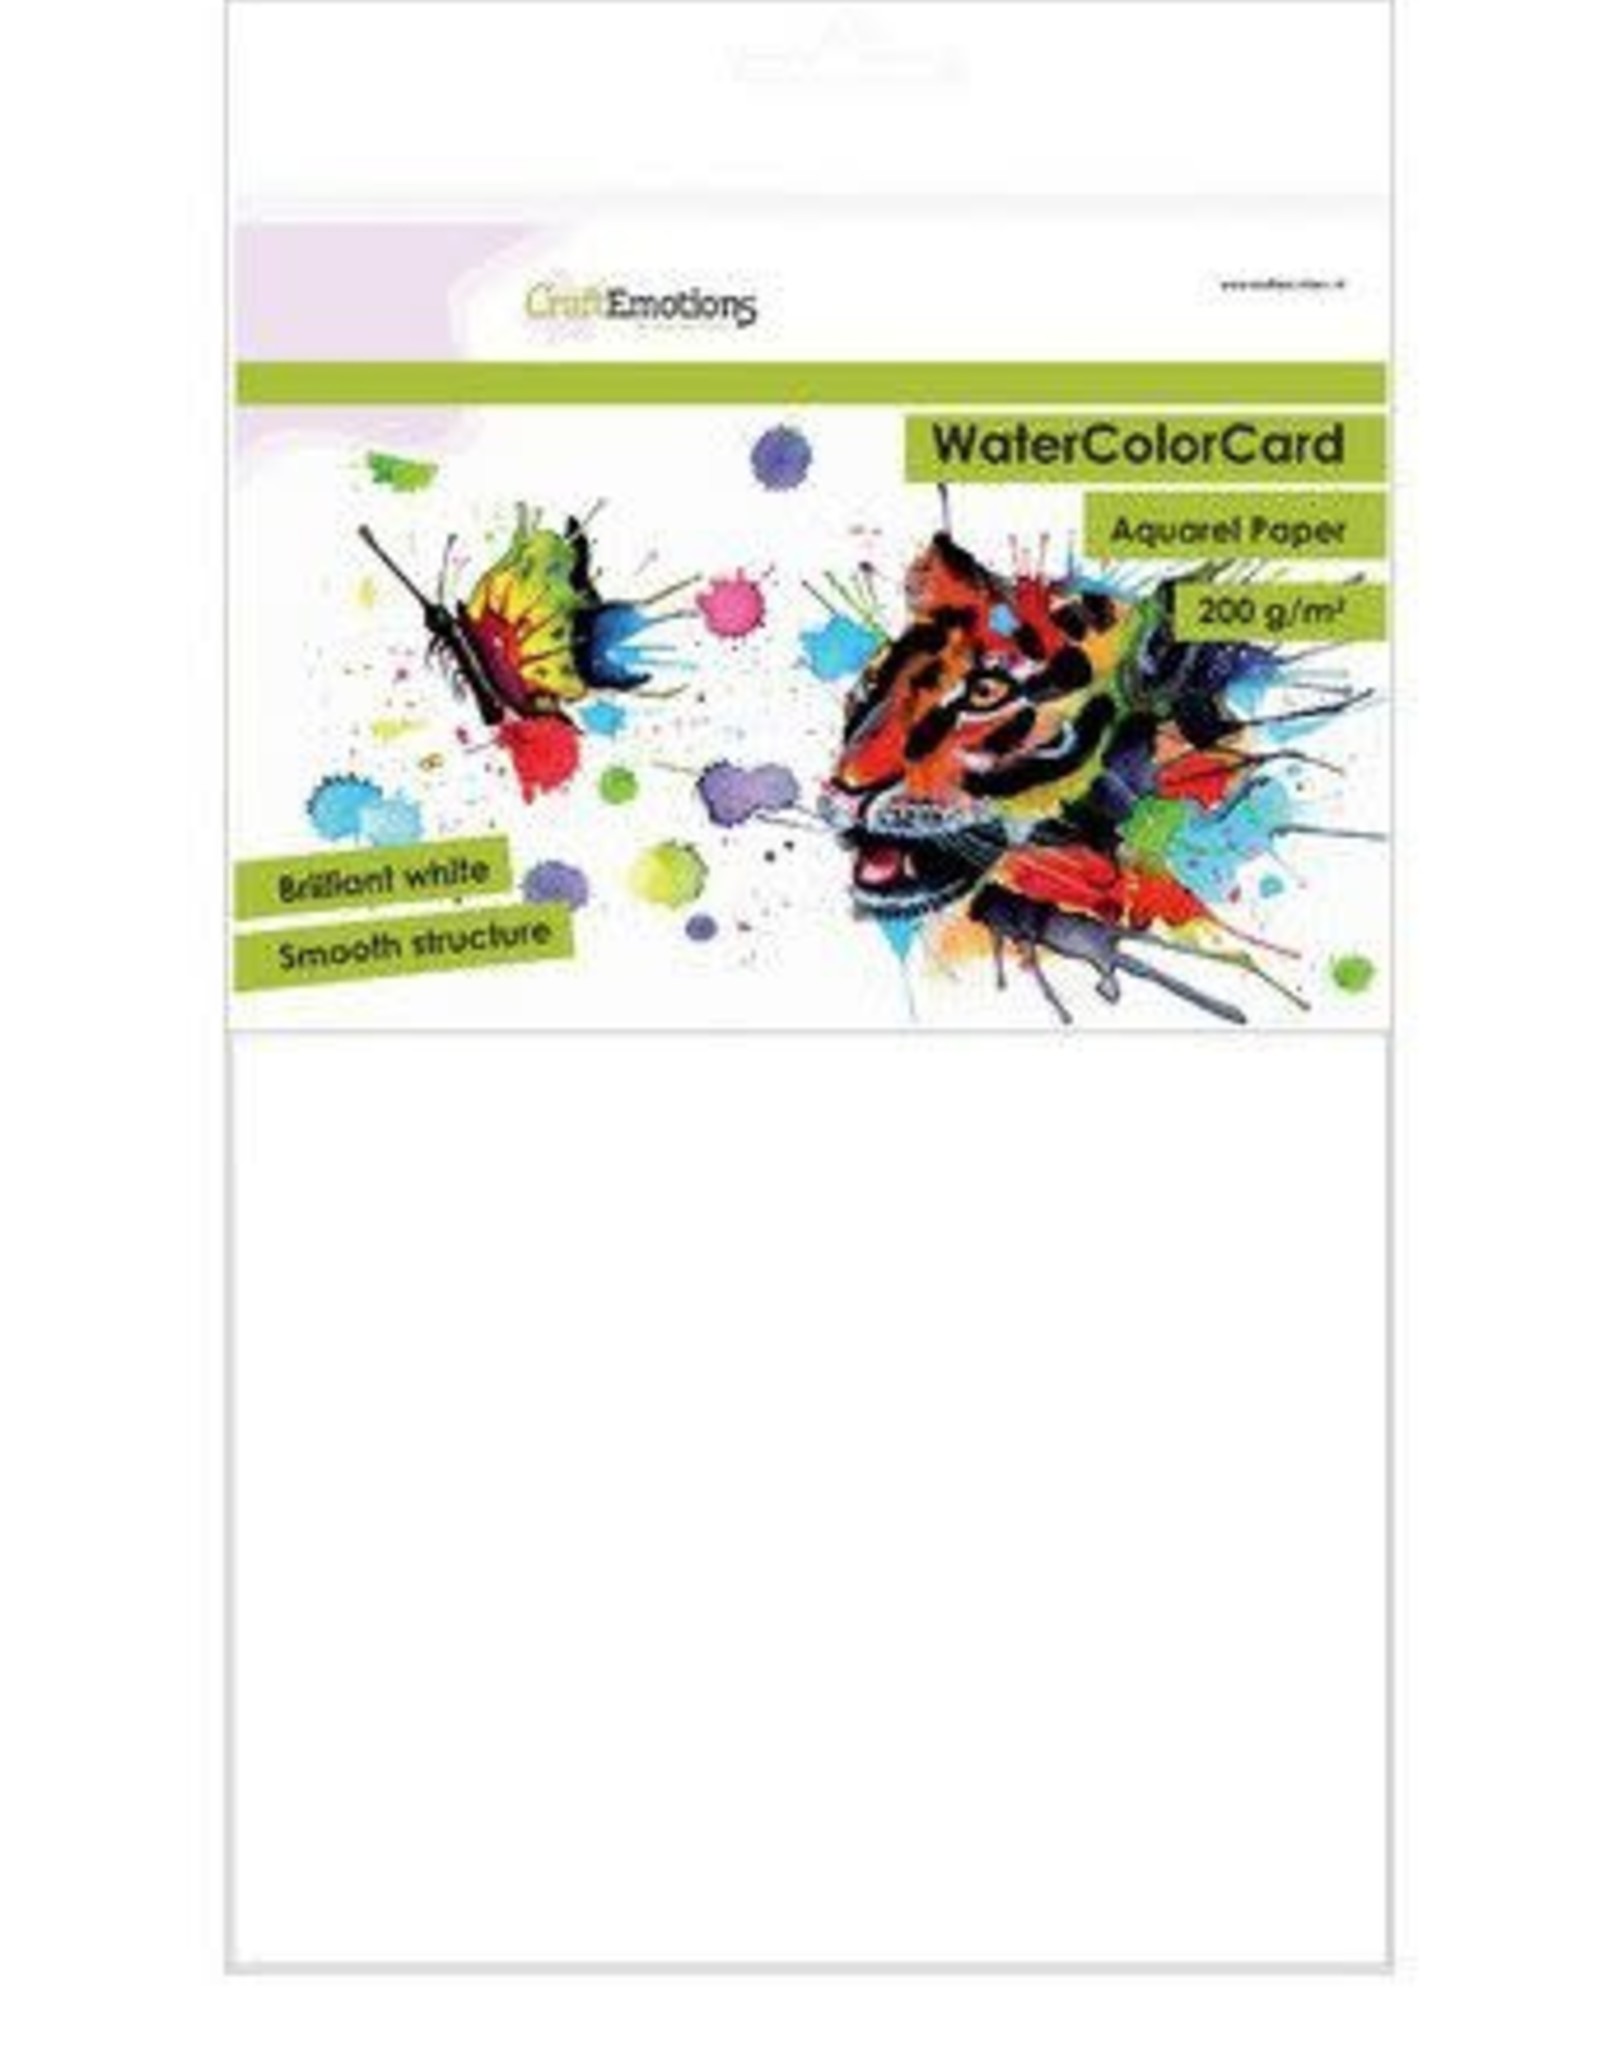 Craft Emotions CraftEmotions WaterColorCard - briljant wit 10 vl A4 - 200 gr